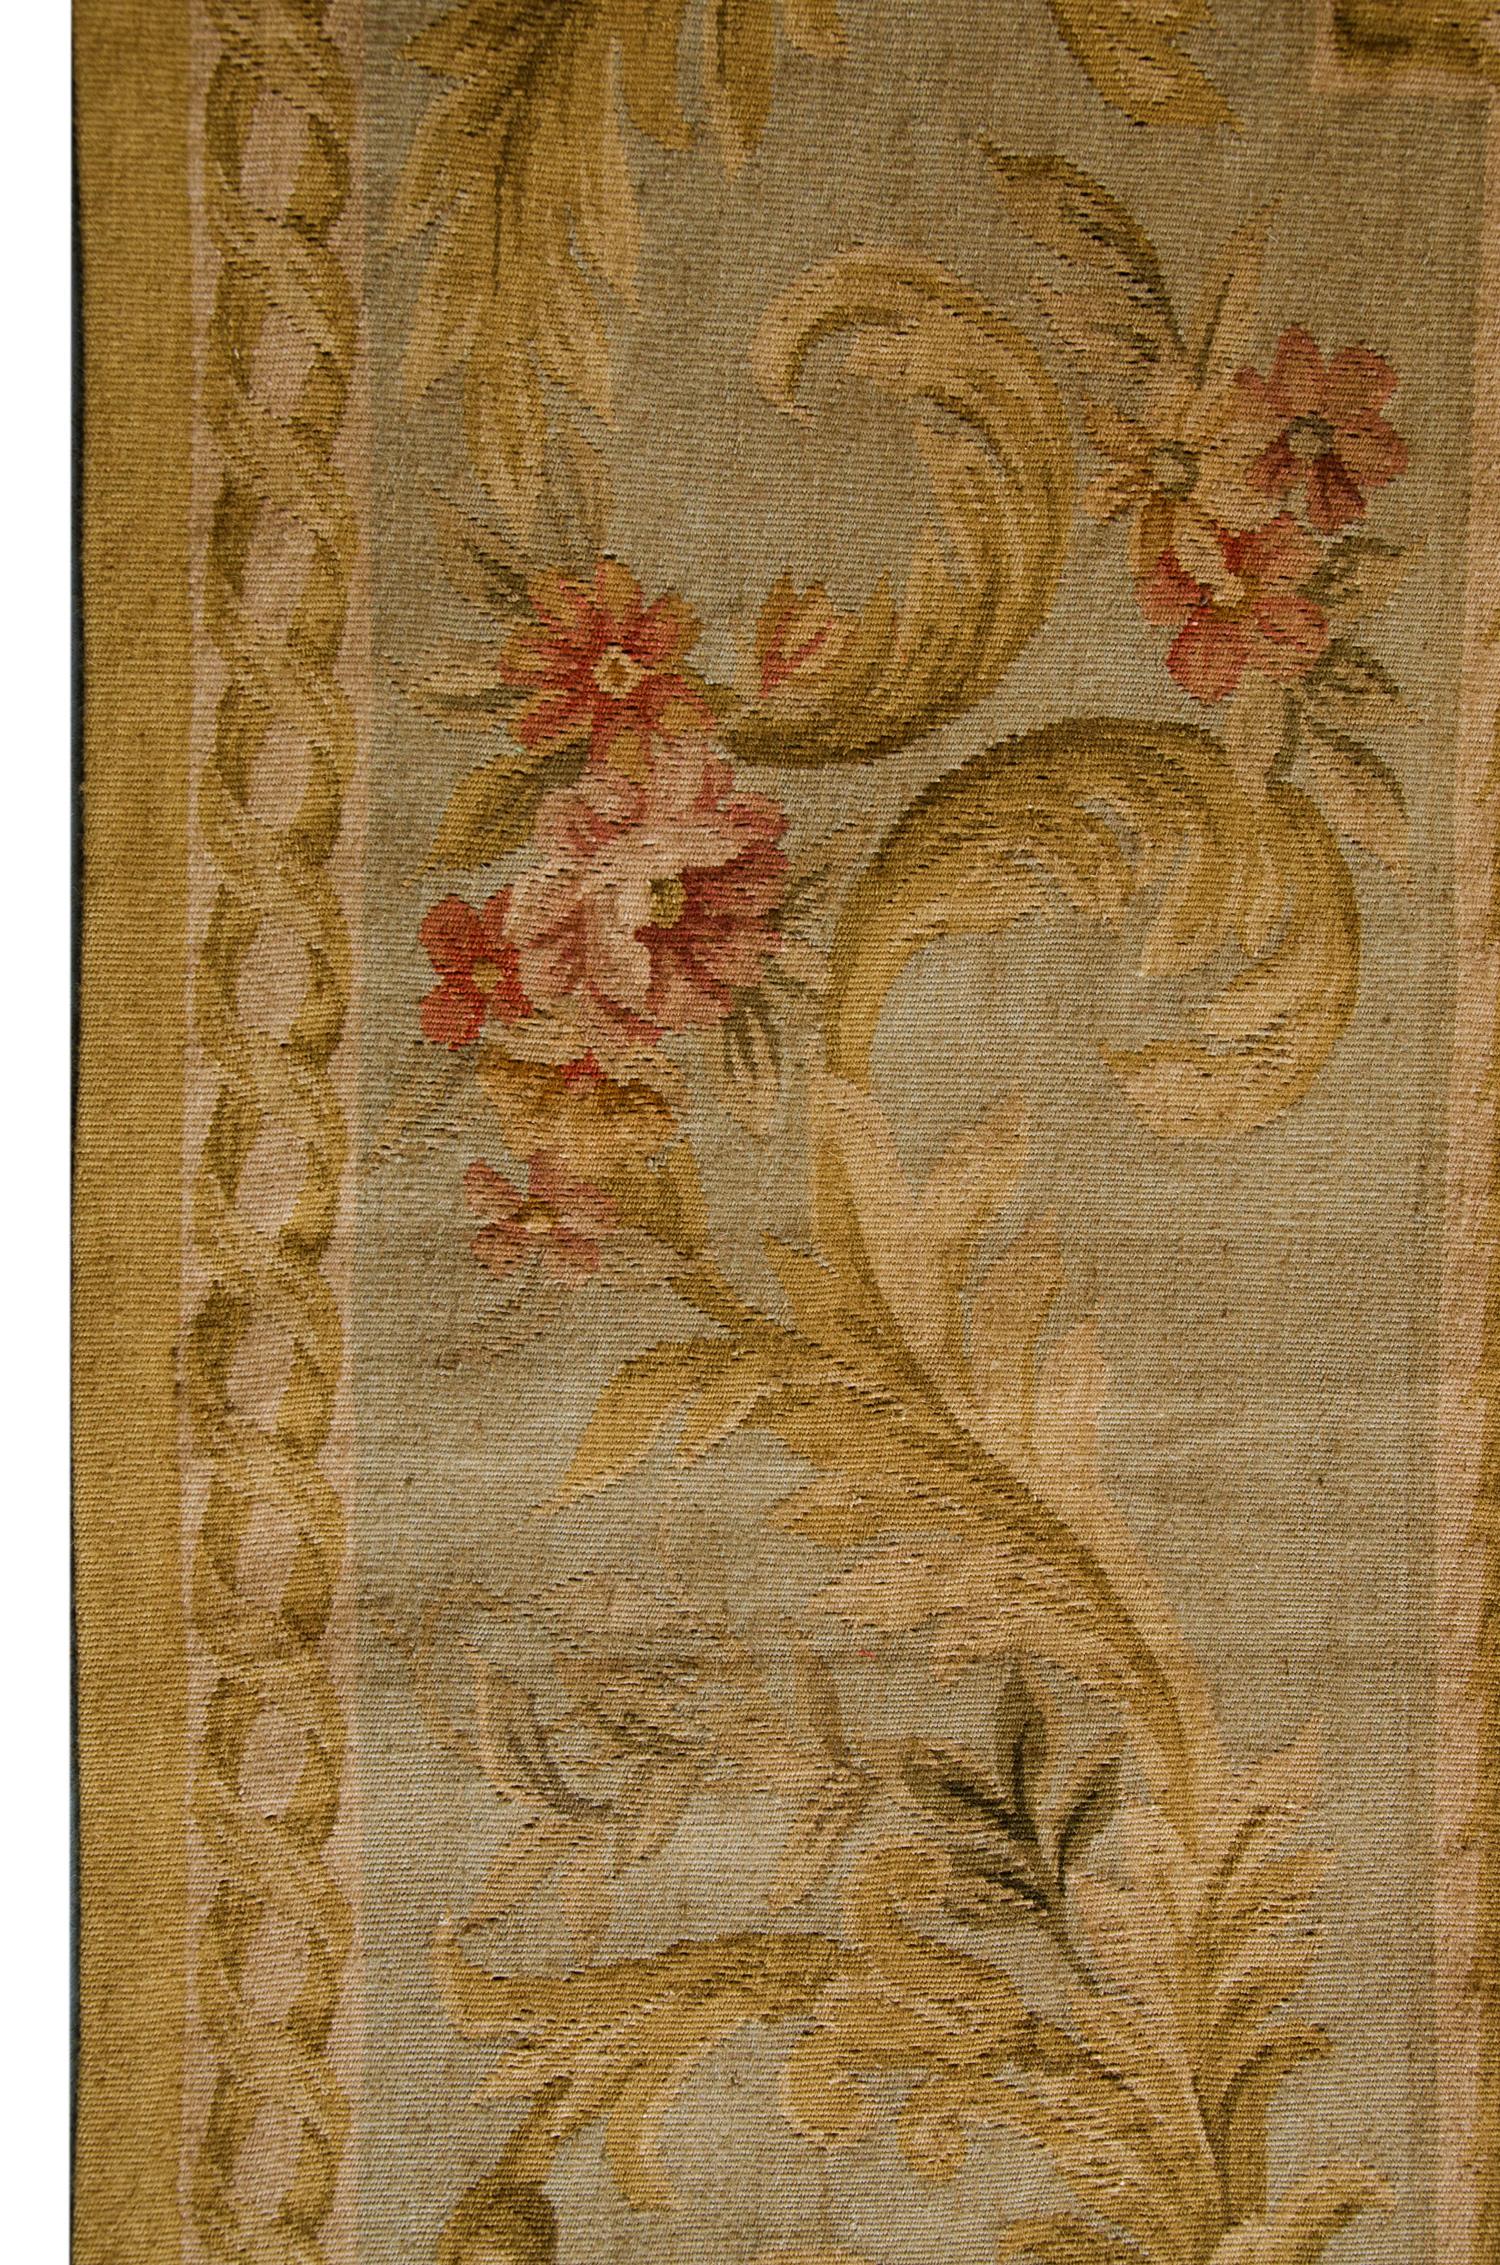 This beige needlepoint Aubusson rug is a high-quality item, getting most of the attention in the rug store by clients because of the elegant color and design. These handmade elegant Chinese Aubusson floor rugs have soft, subtle shades of colors with